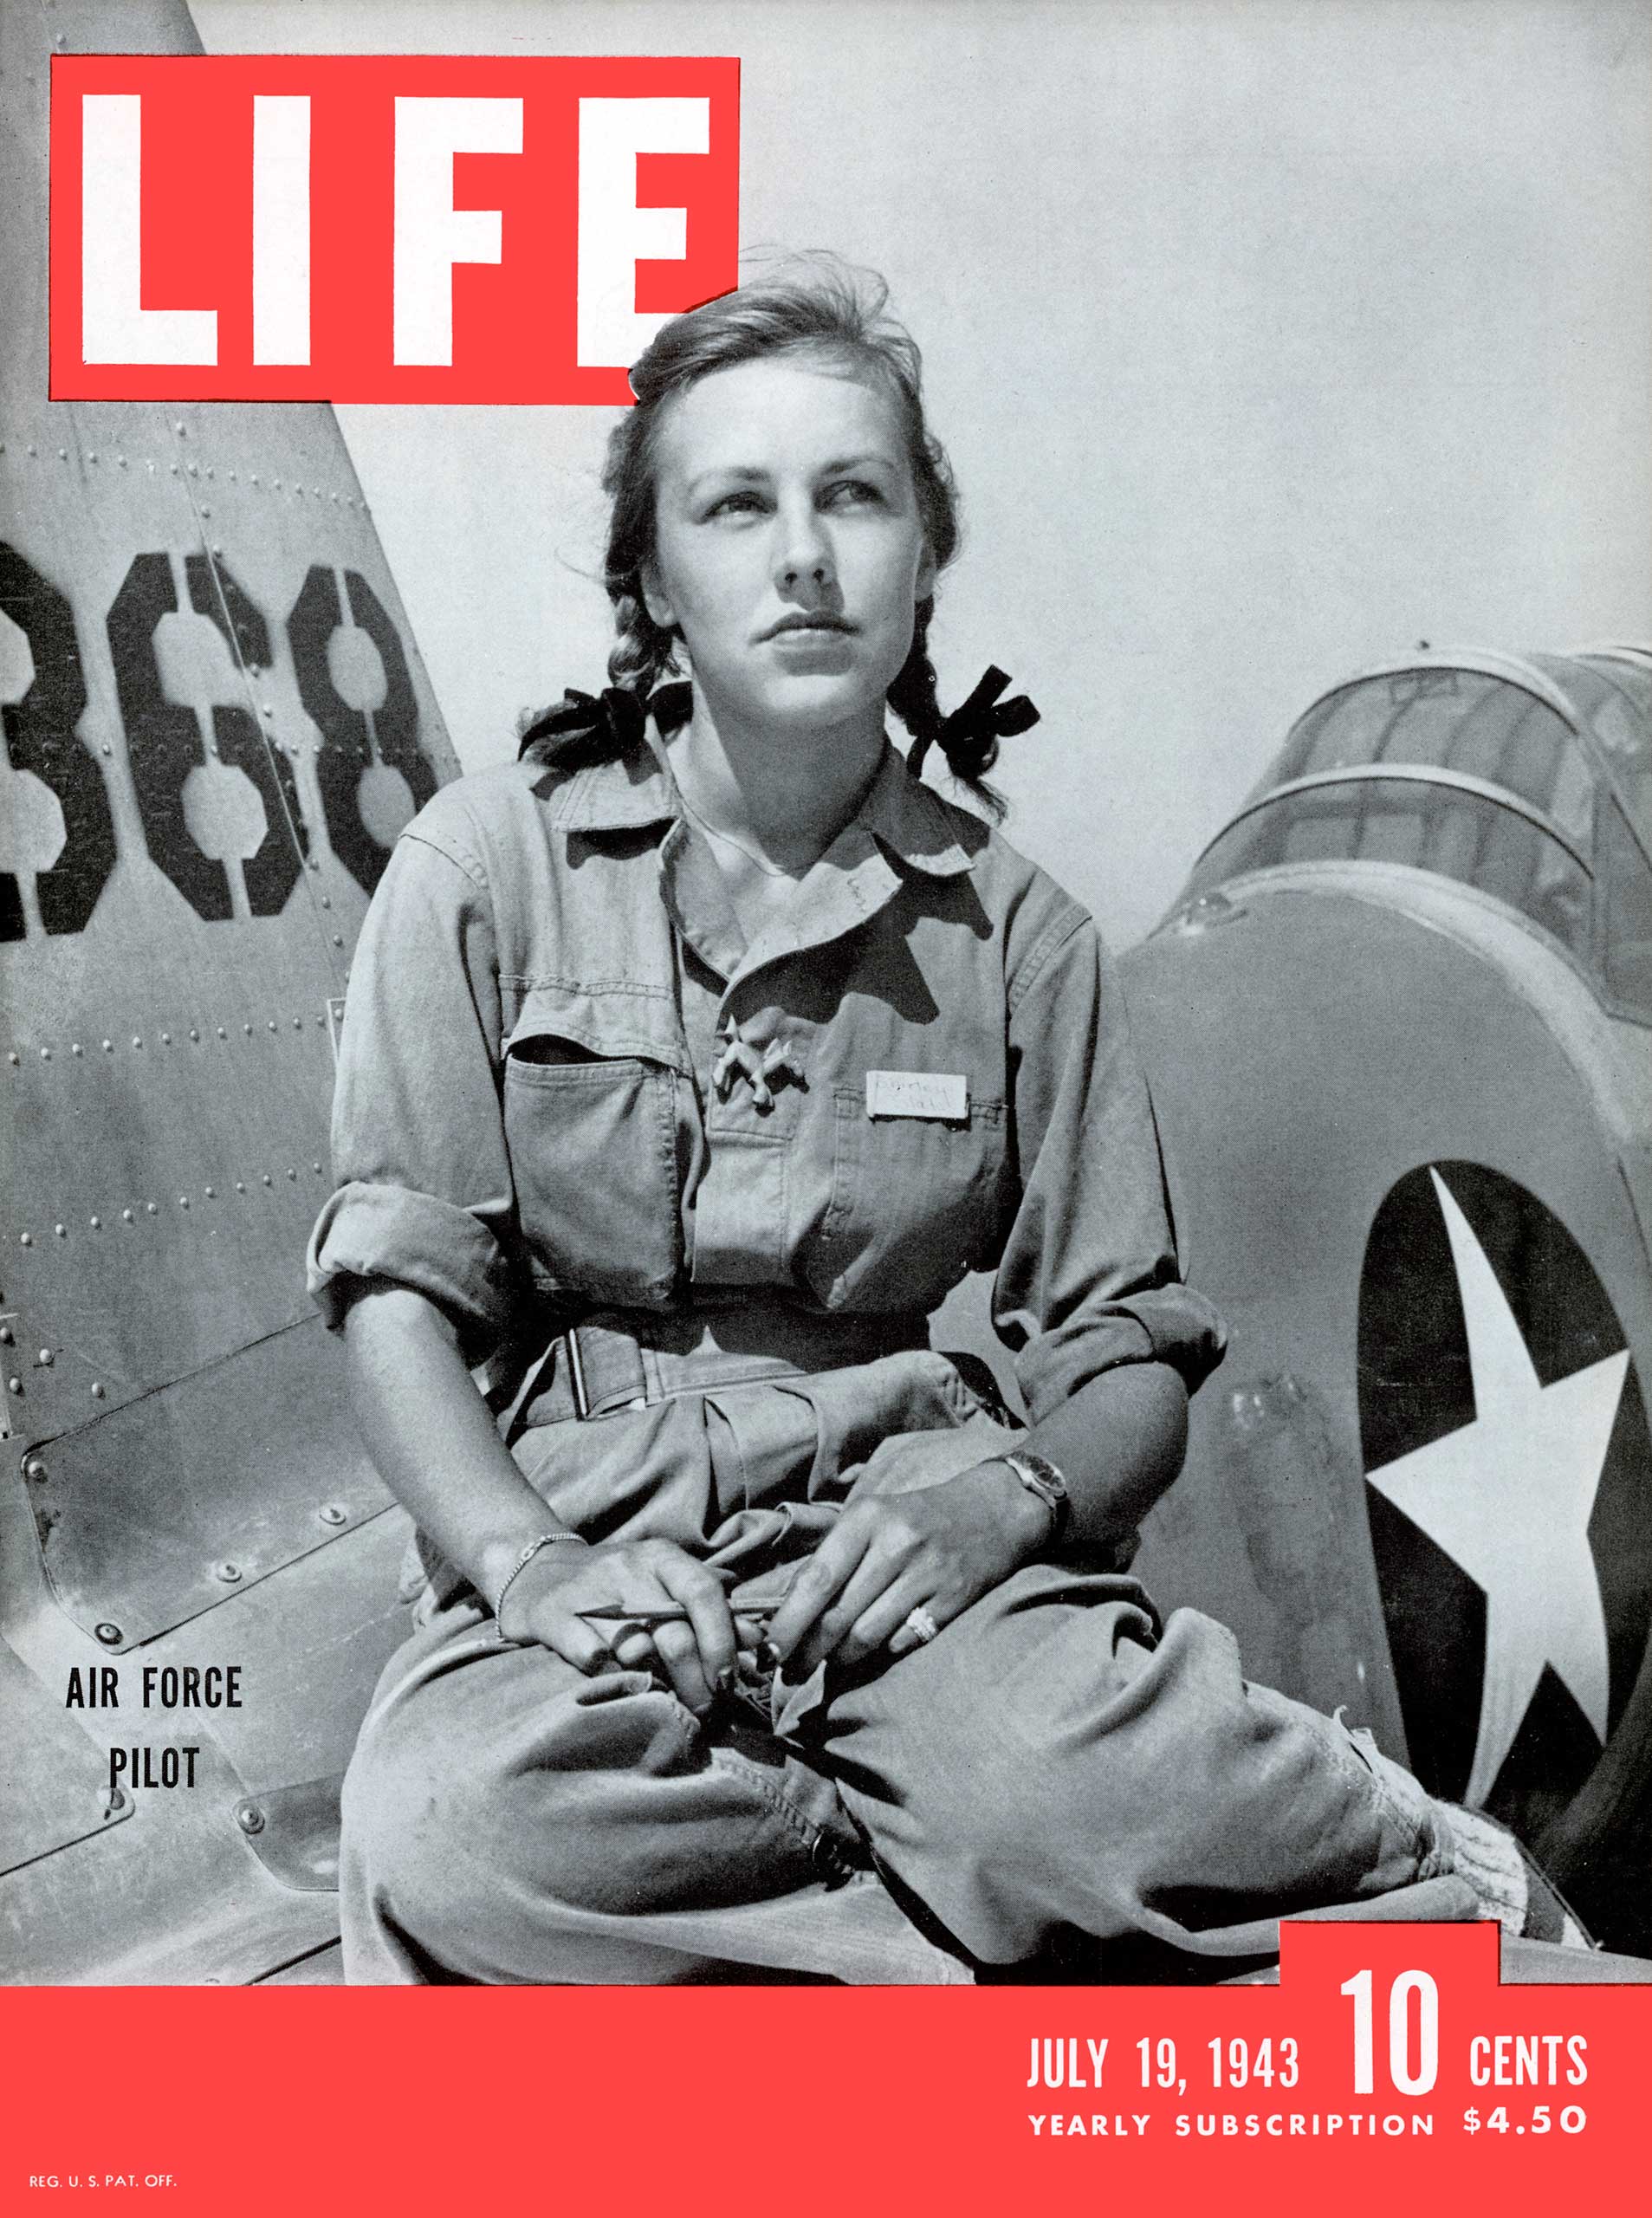 July 19, 1943 cover of LIFE magazine.